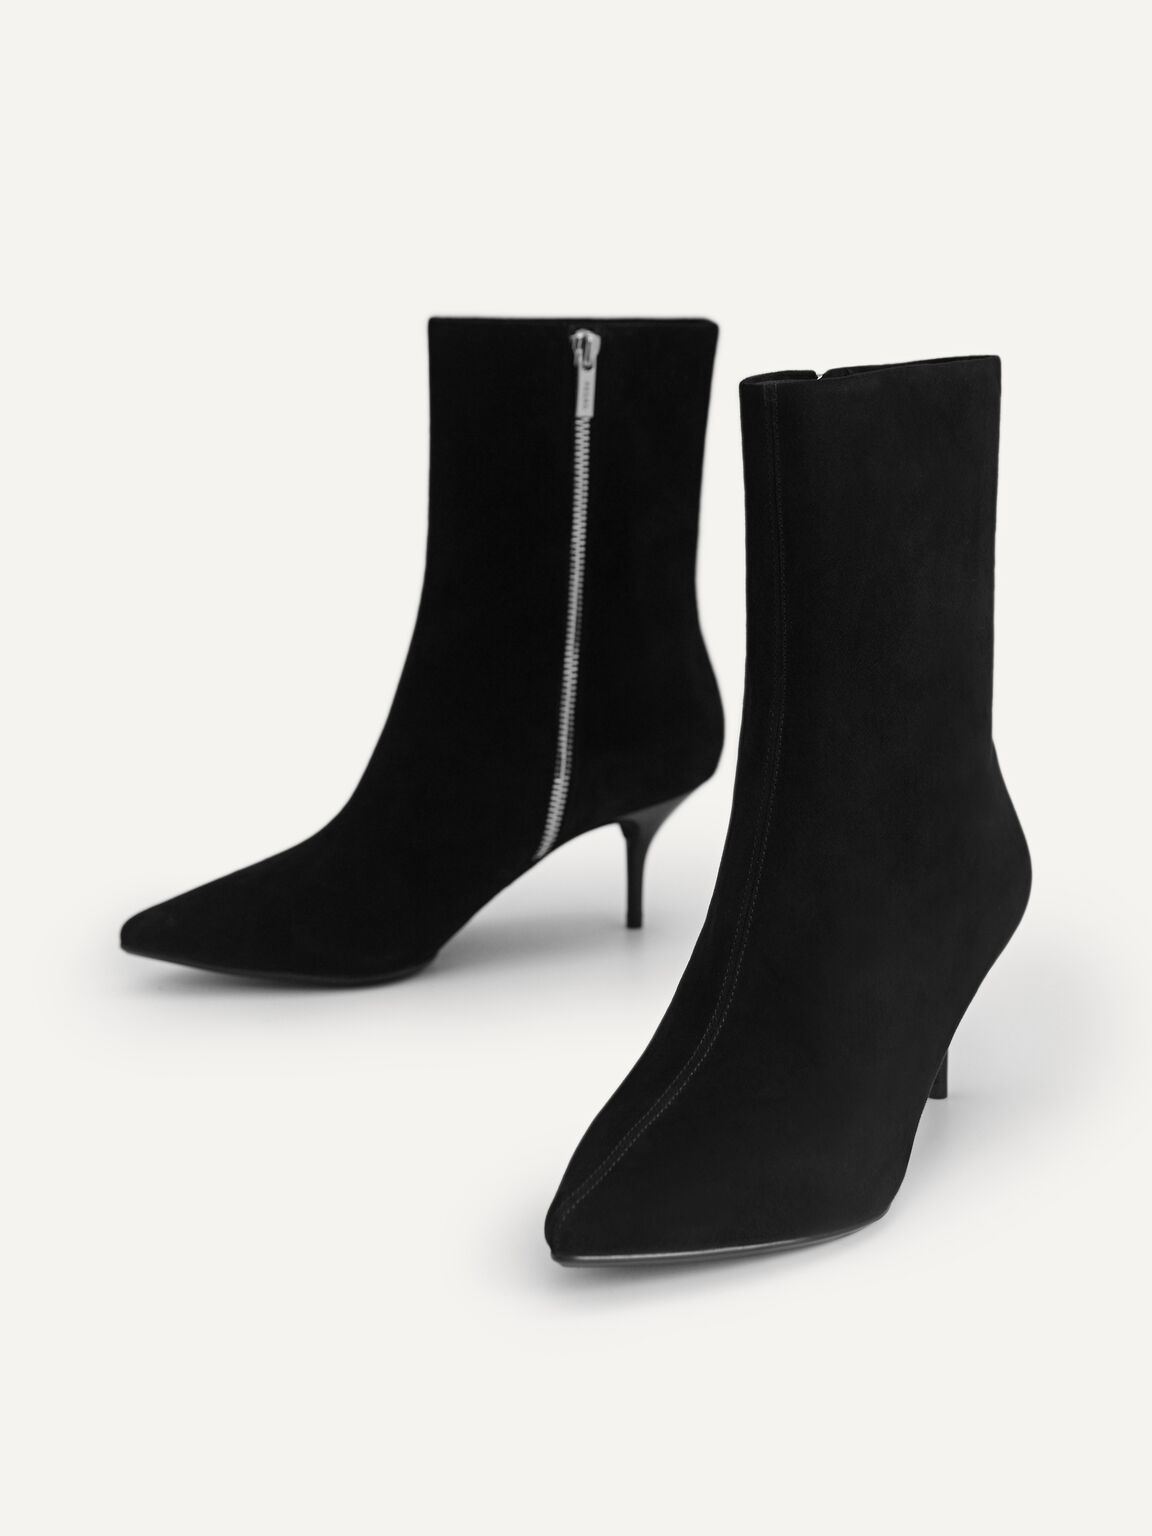 Suede Leather Ankle Boots, Black, hi-res